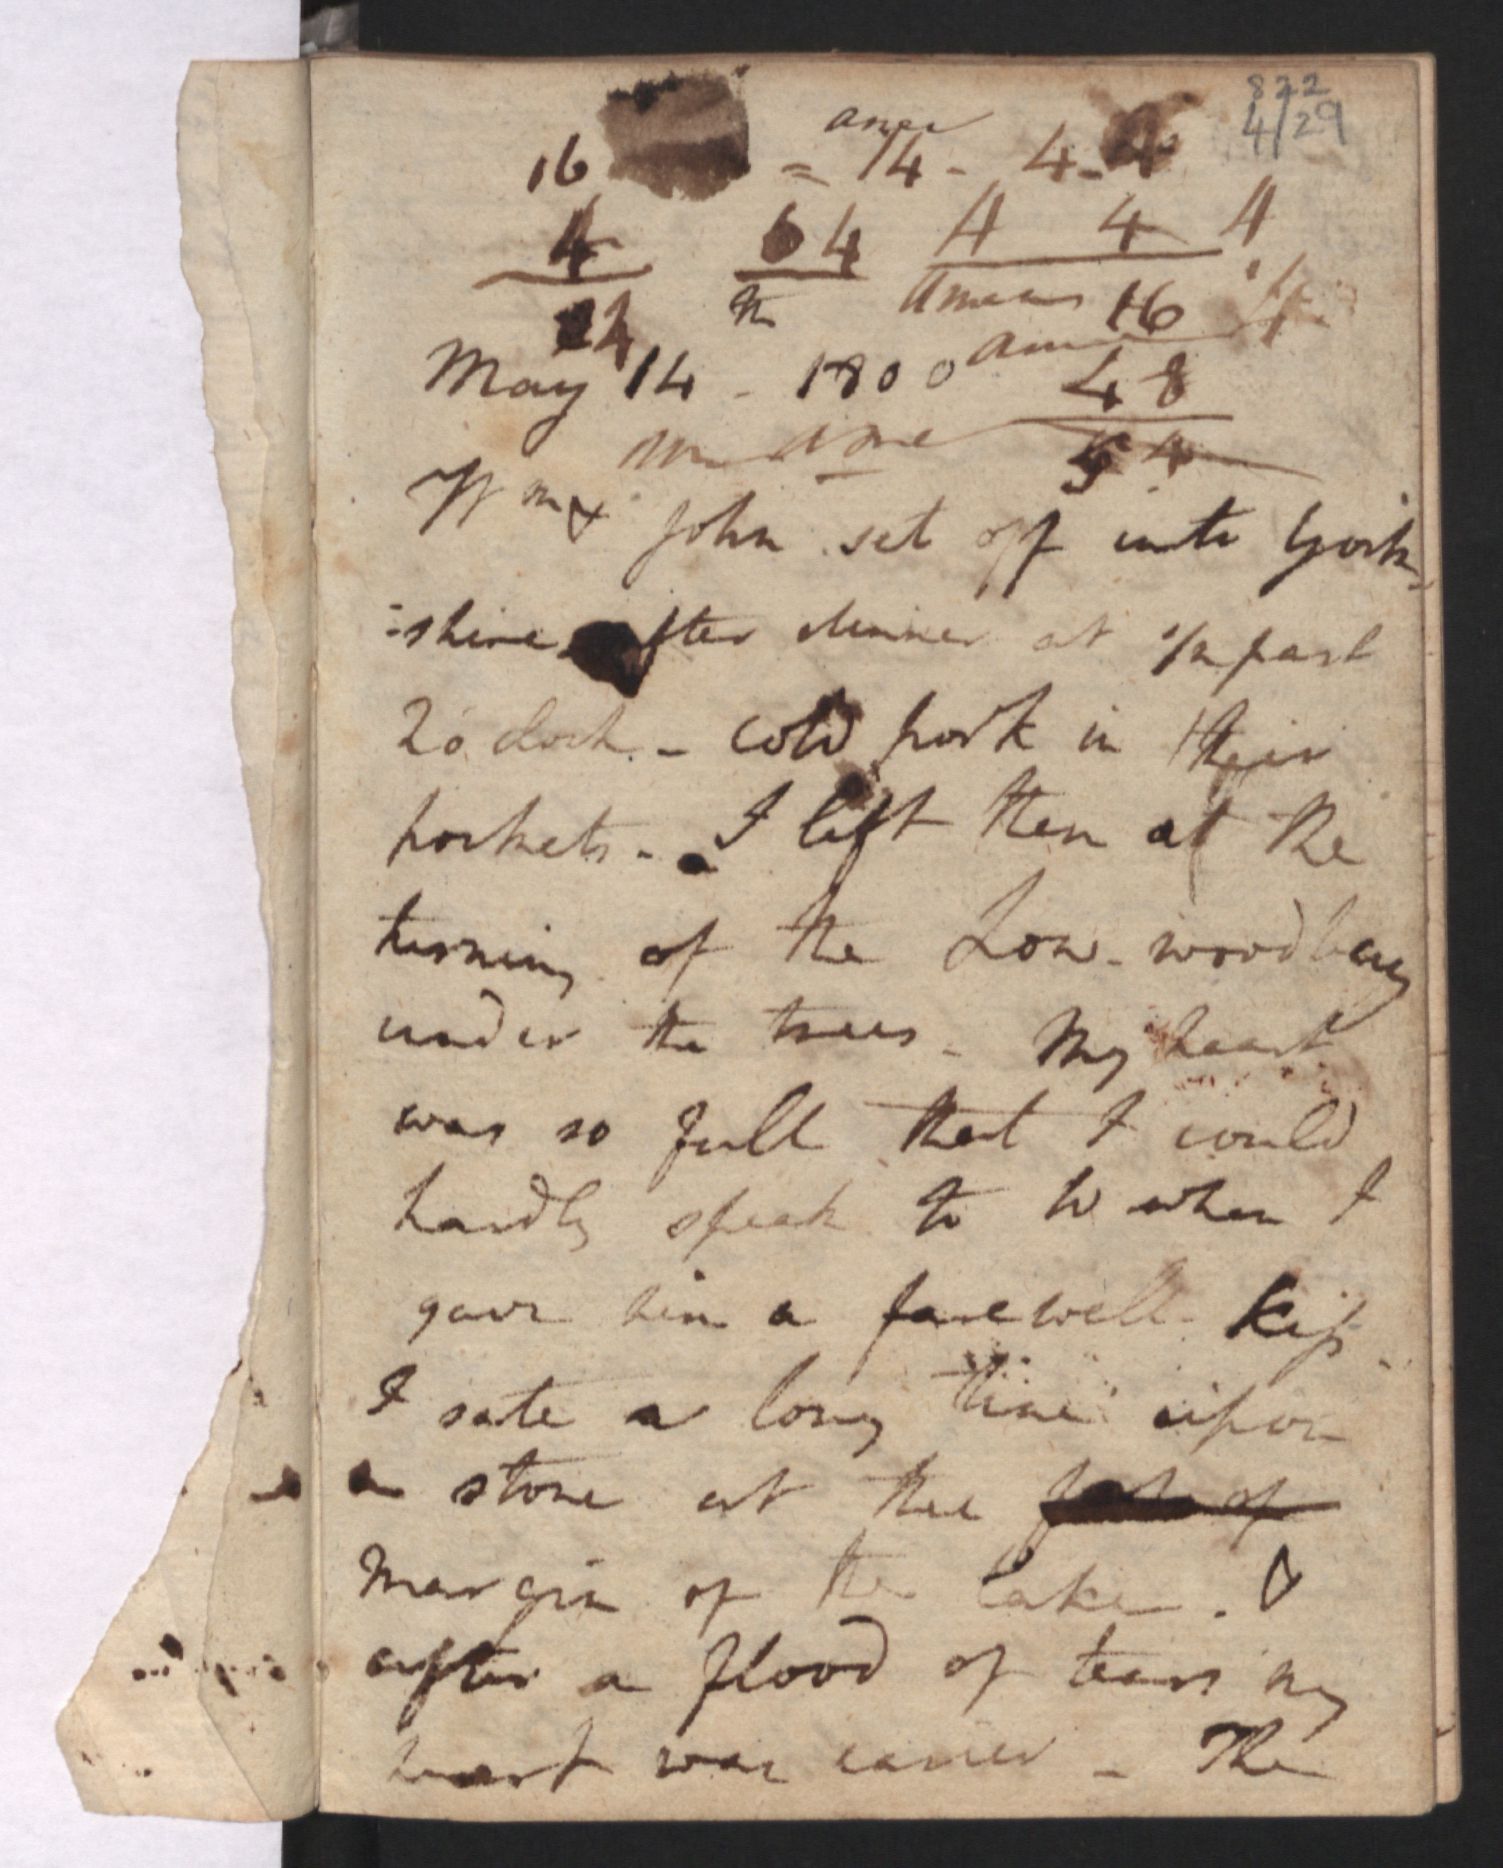 The first page of Dorothy’s journal entries in DCMS 20 